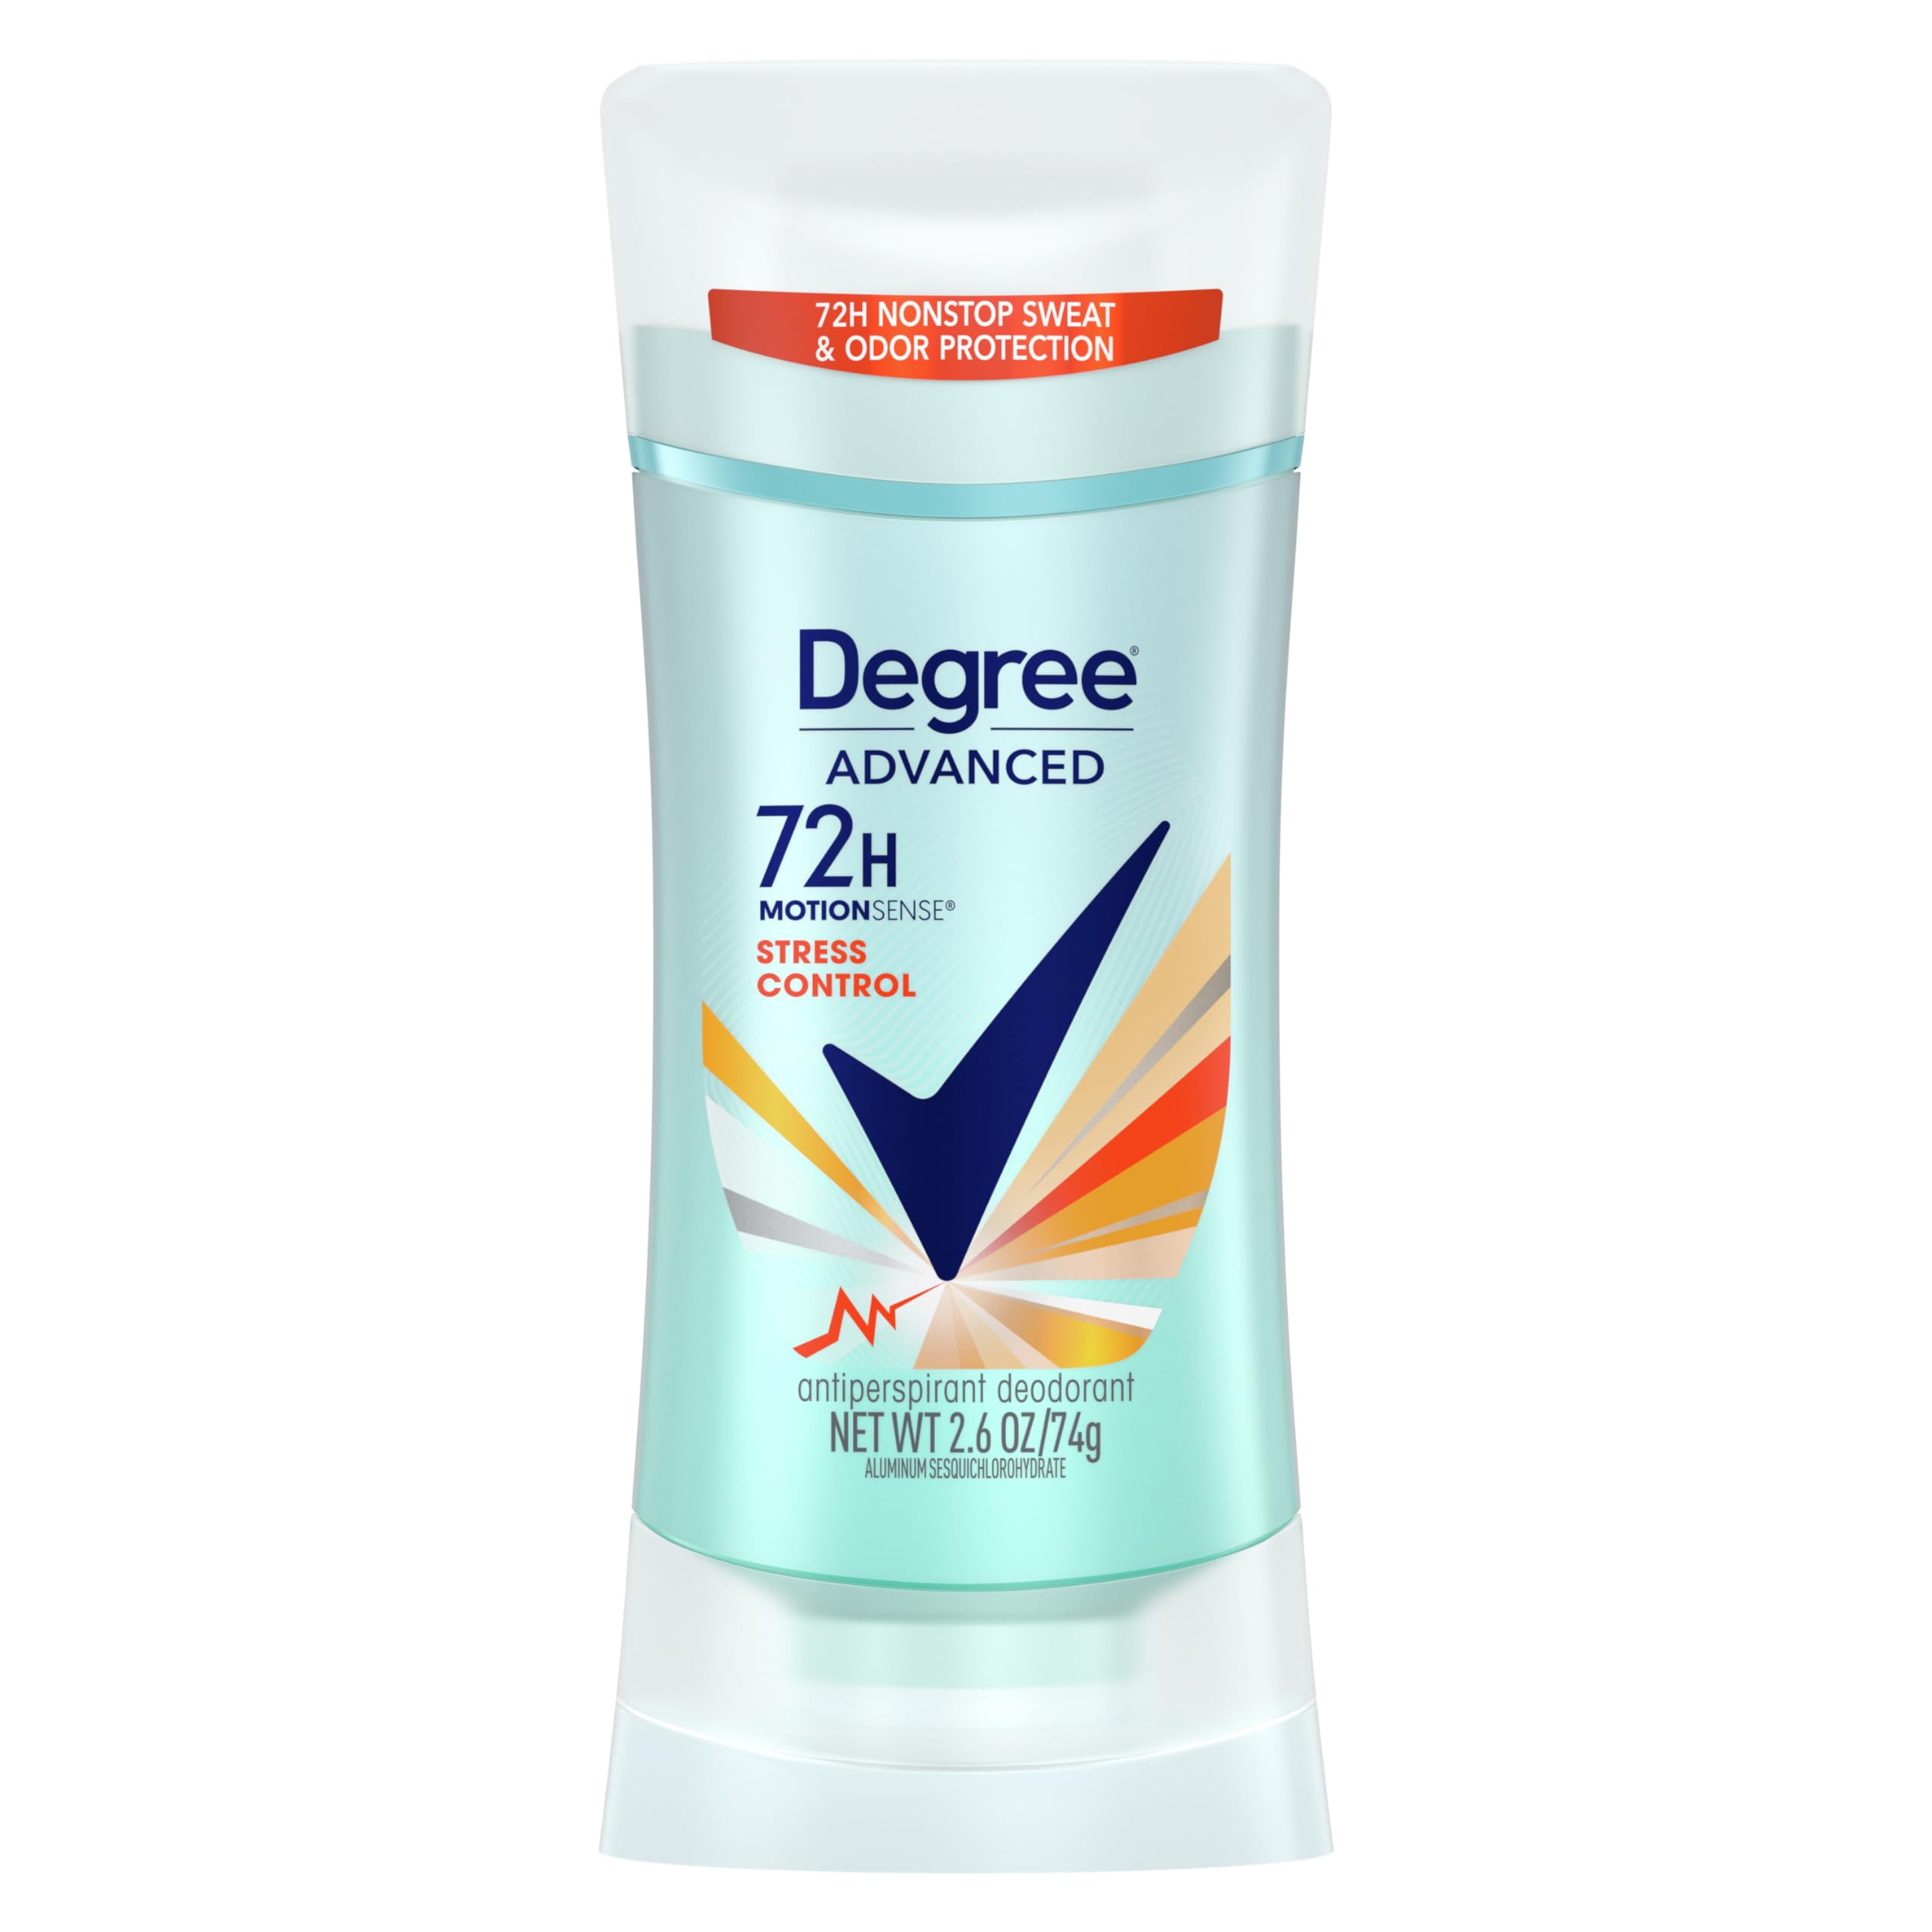 Degree Advanced Antiperspirant Deodorant Stress Control 72-Hour Sweat & Odor Protection Antiperspirant for Women with MotionSense Technology 2.6 oz